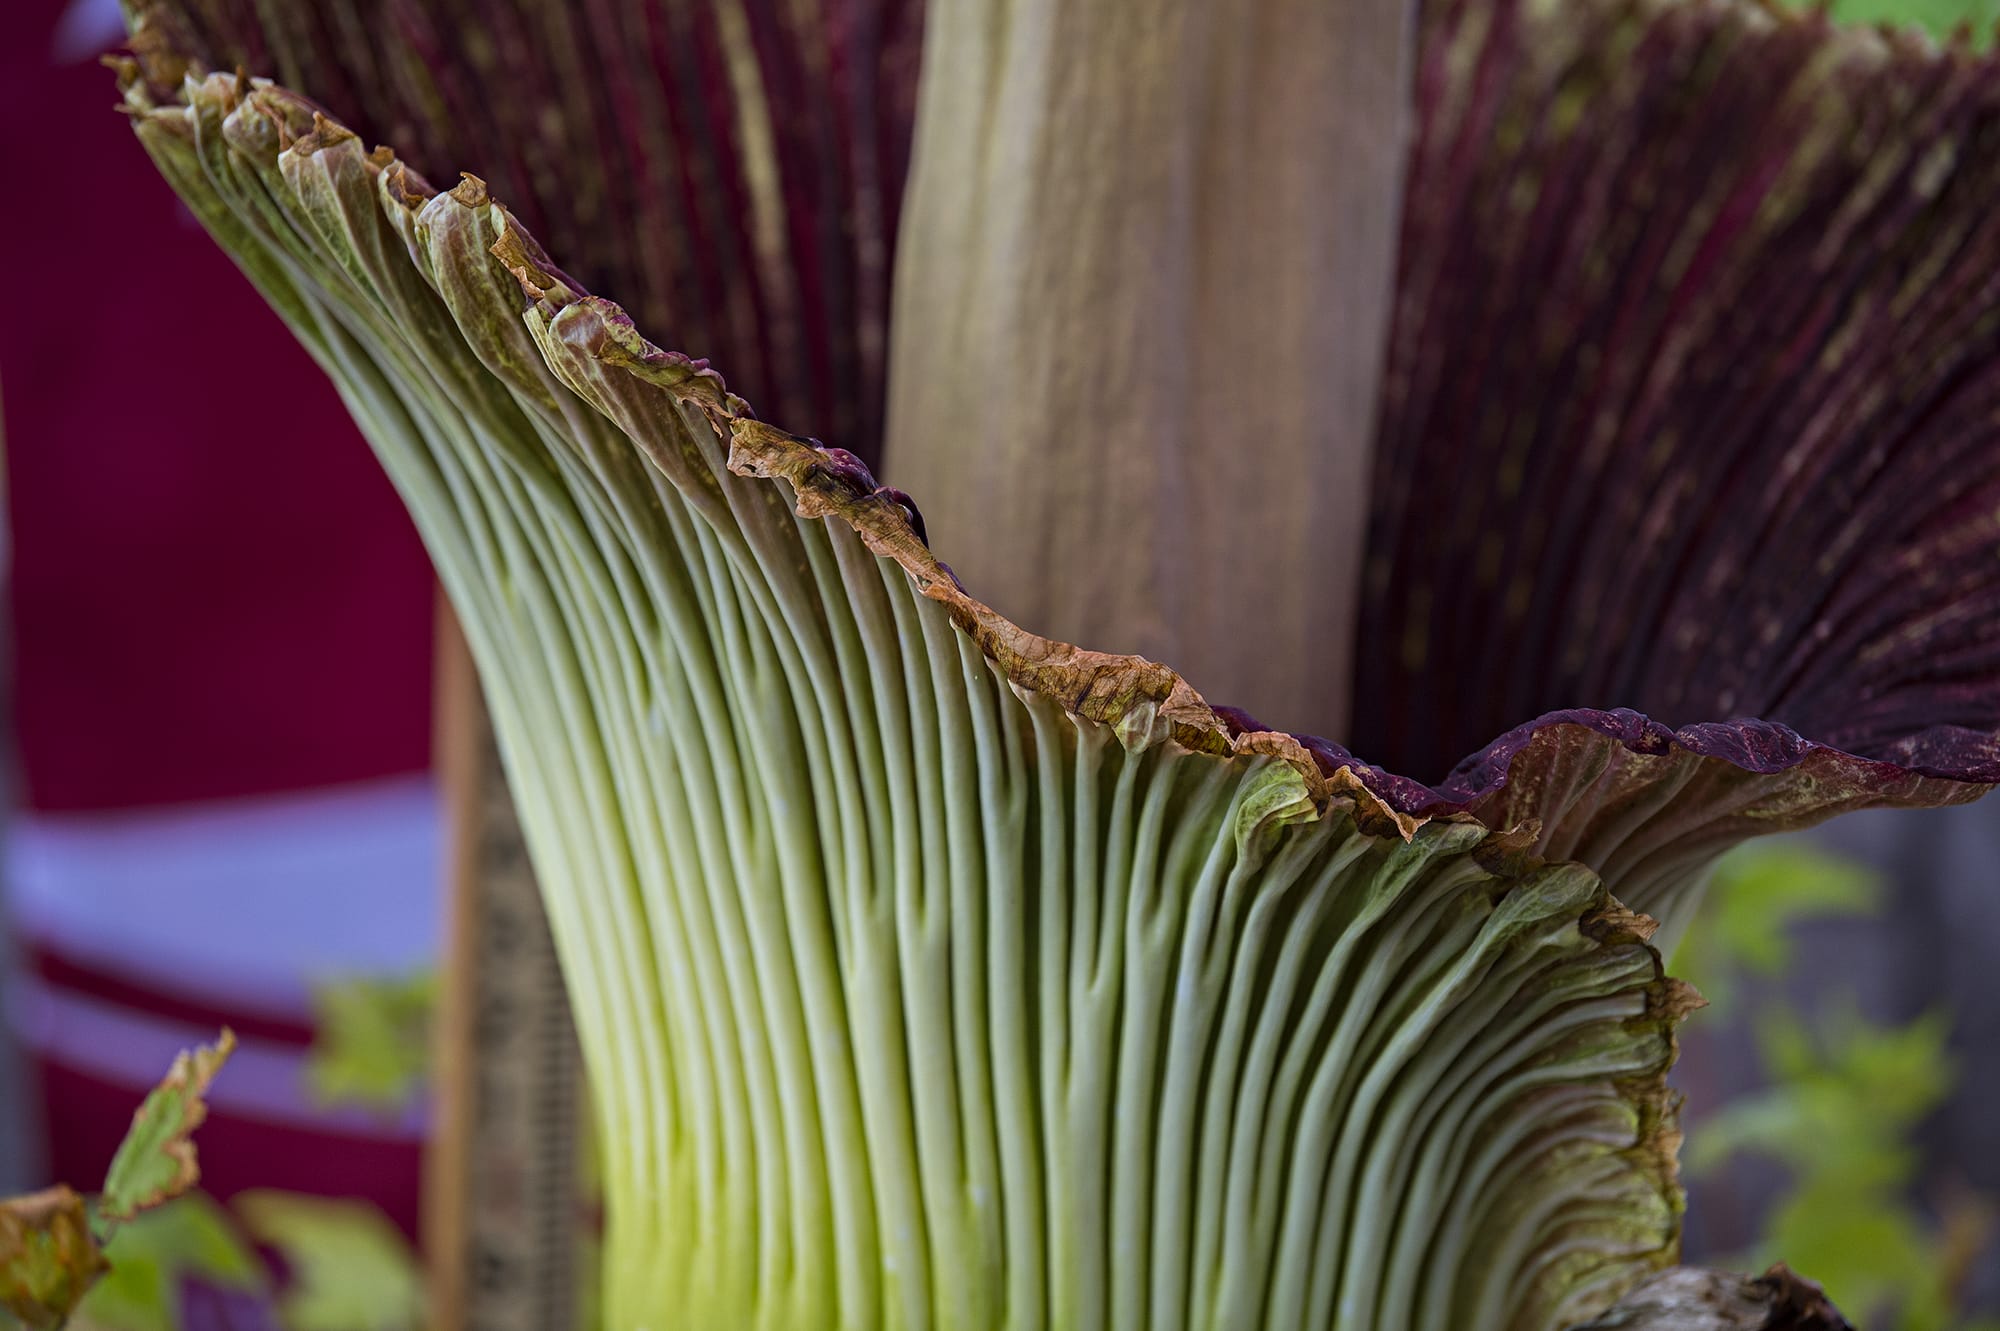 Titan VanCoug, the rare corpse flower, comes to life to the delight of local residents, students and staff at Washington State University Vancouver on Tuesday morning, July 16, 2019.